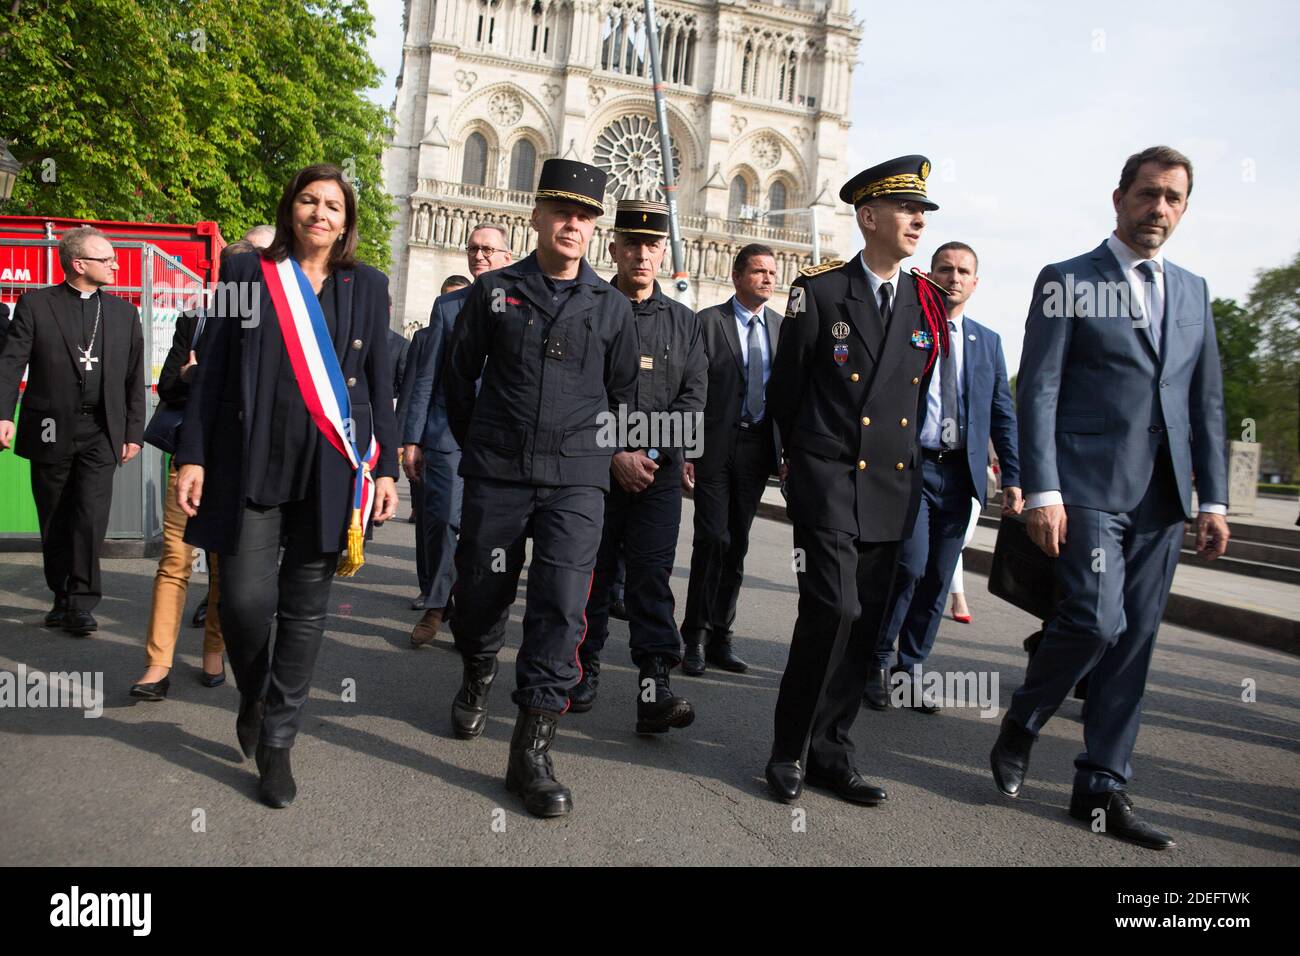 French Interior Minister Christophe Castaner (R), Paris prefect Didier Lallement (2R), Paris mayor Anne Hidalgo (L), and other officials walk by Notre Dame cathedral on April 18, 2019 in Paris. France paid a daylong tribute on April 18, 2019 to the Paris firefighters who saved Notre Dame Cathedral from collapse, while construction workers rushed to secure an area above one of the church's famed rose-shaped windows and other vulnerable sections of the fire-damaged landmark. Photo by Raphael Lafargue/ABACAPRESS.COM Stock Photo